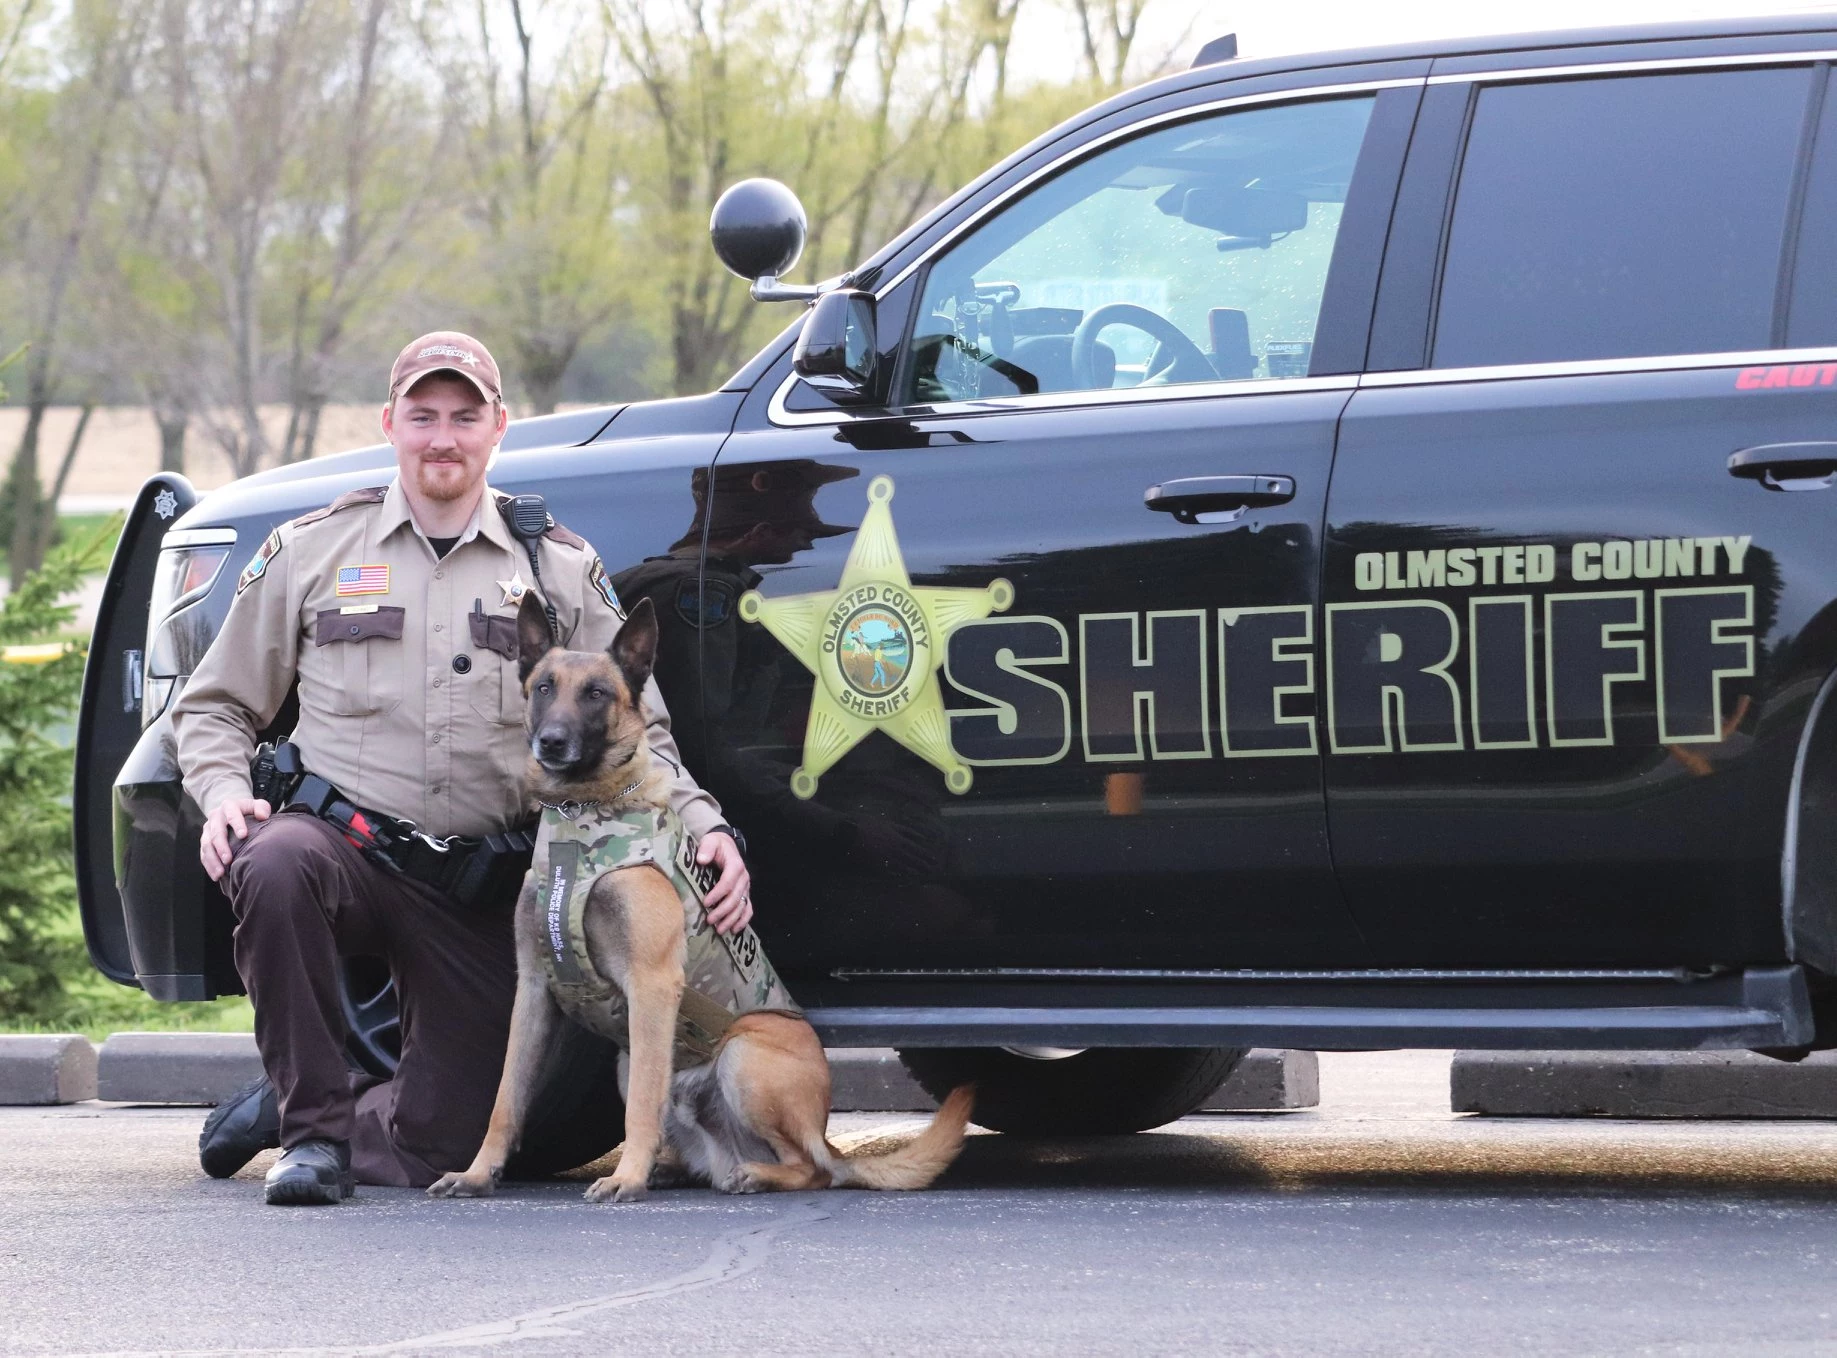 K-9 Police Minnesota Olmsted County Sheriff's Office Canine Unit Office & Dog 